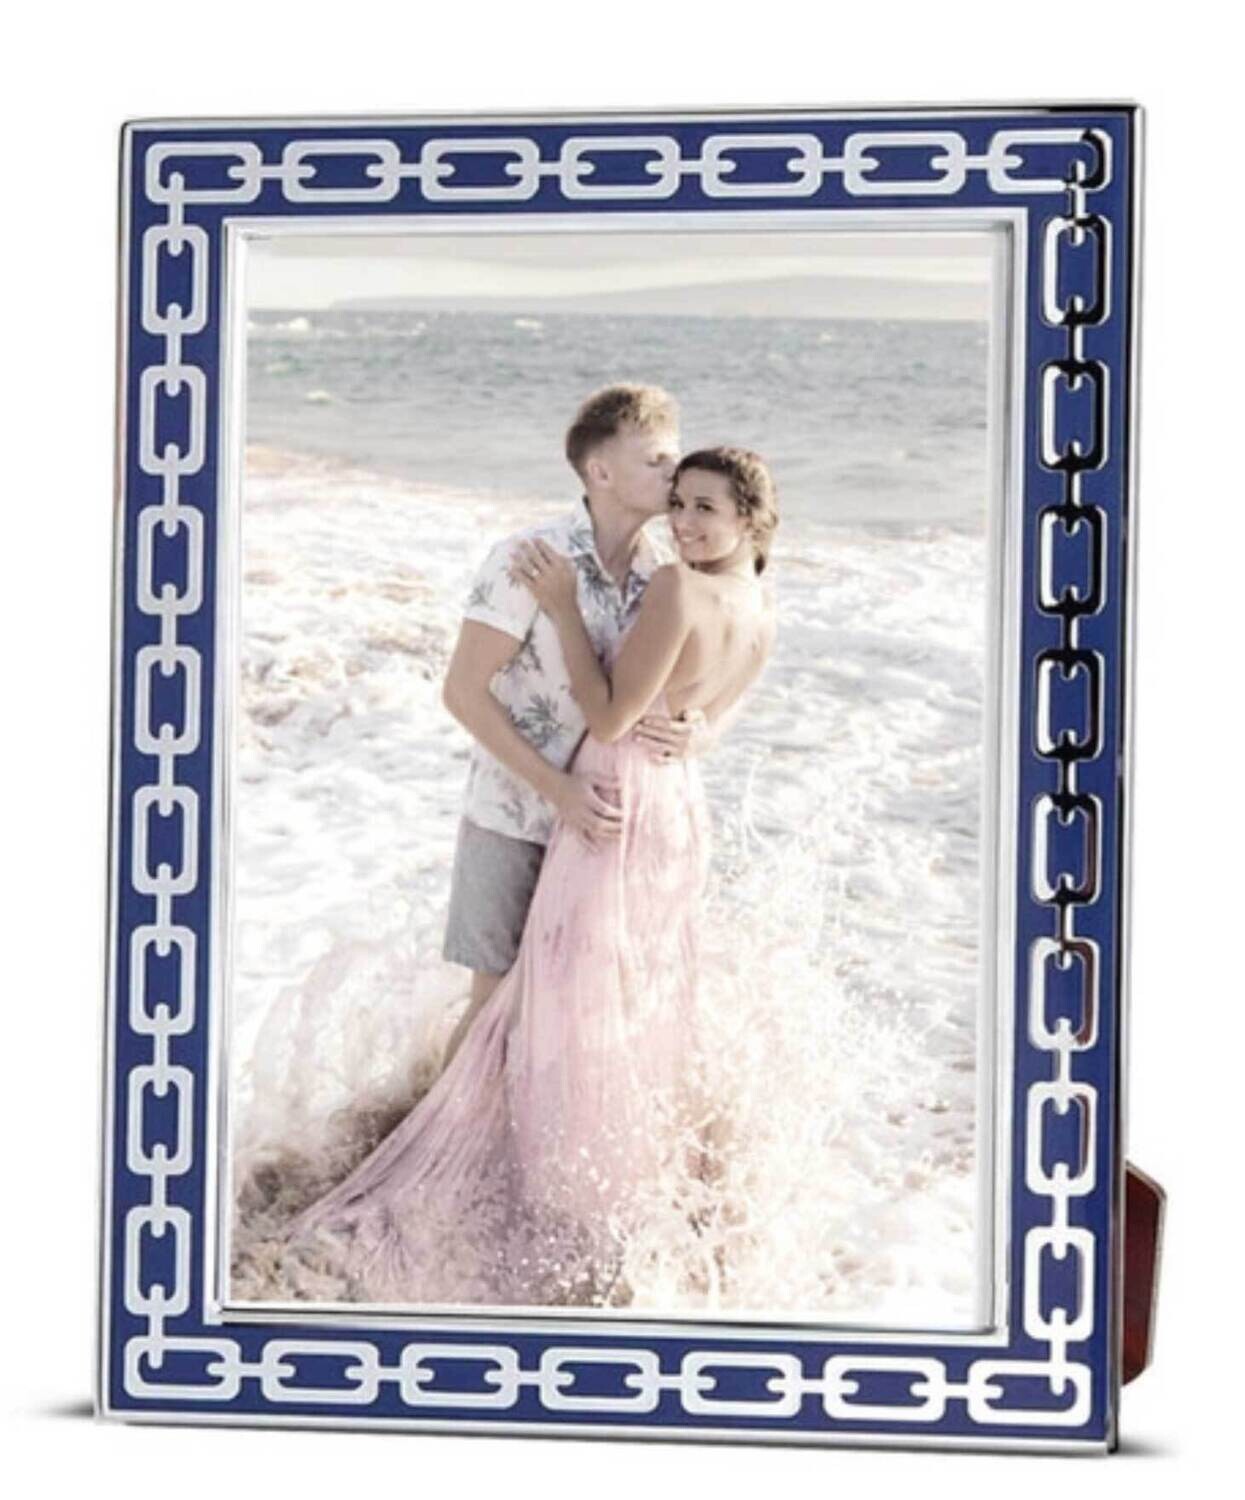 Cunill Links 8x10 Inch Picture Frame Blue Silverplated & Enamel 42479B